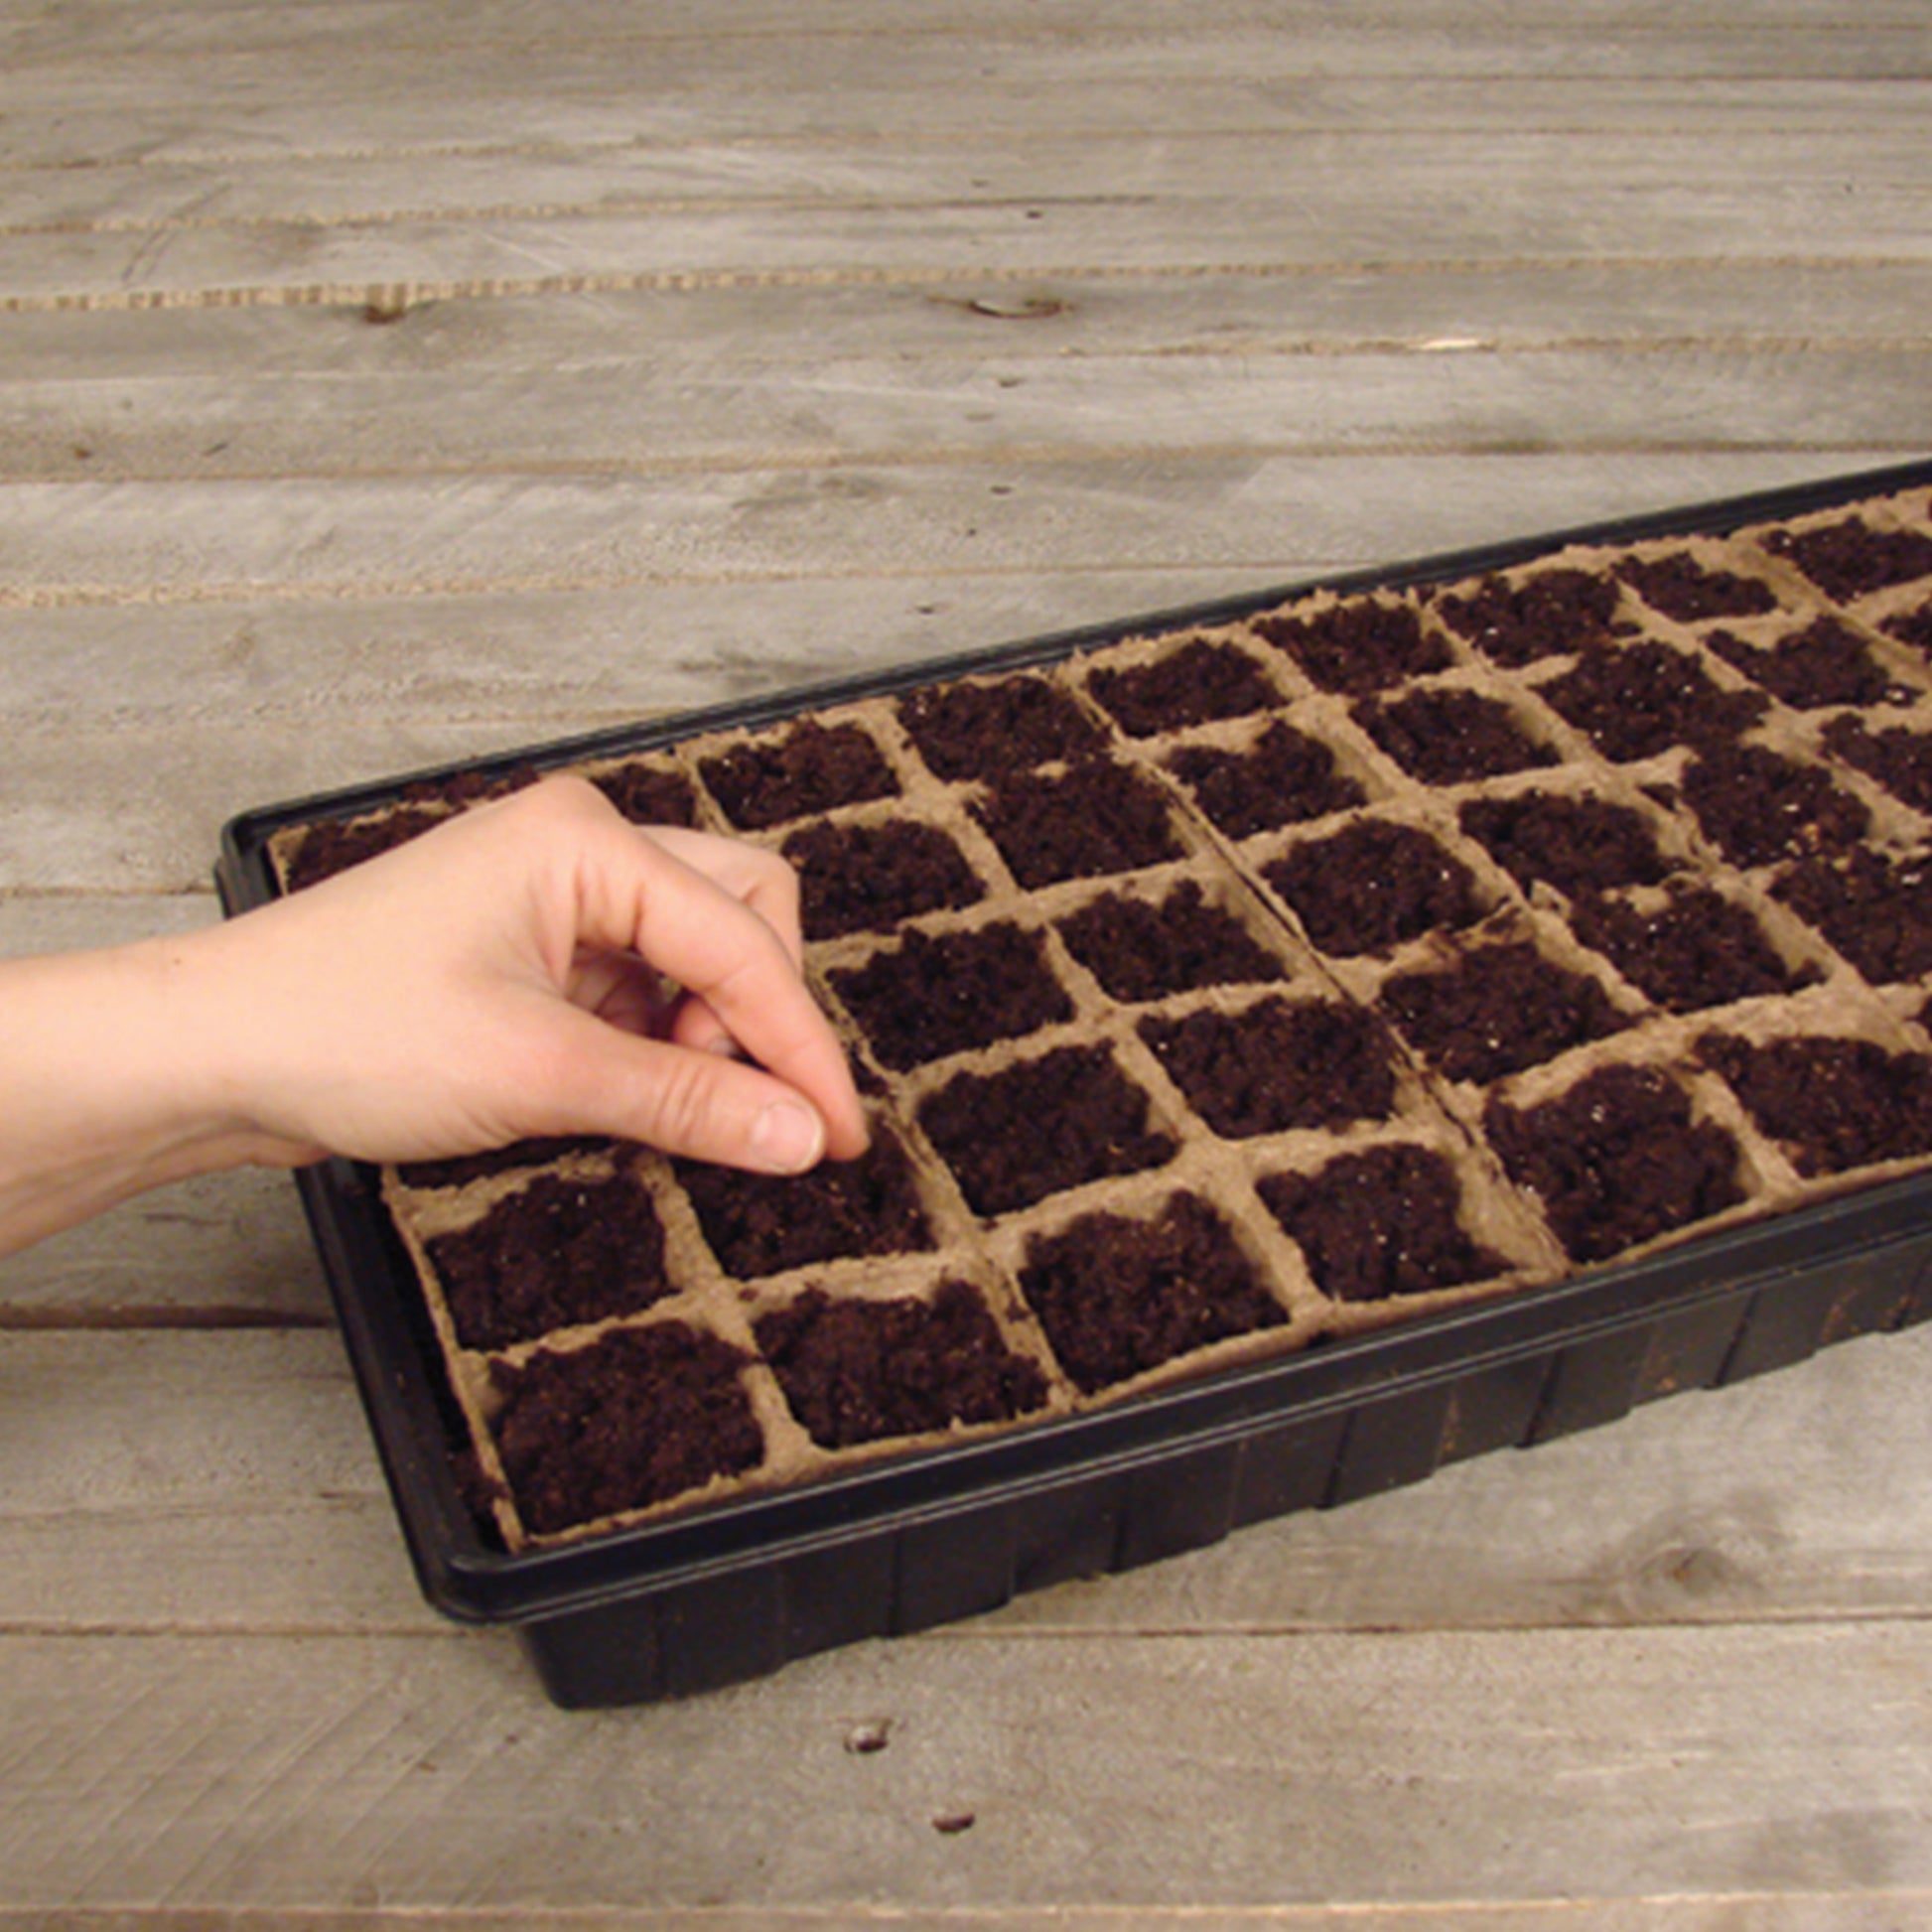 Sow seeds in peat strips according to the directions on your seed packets.